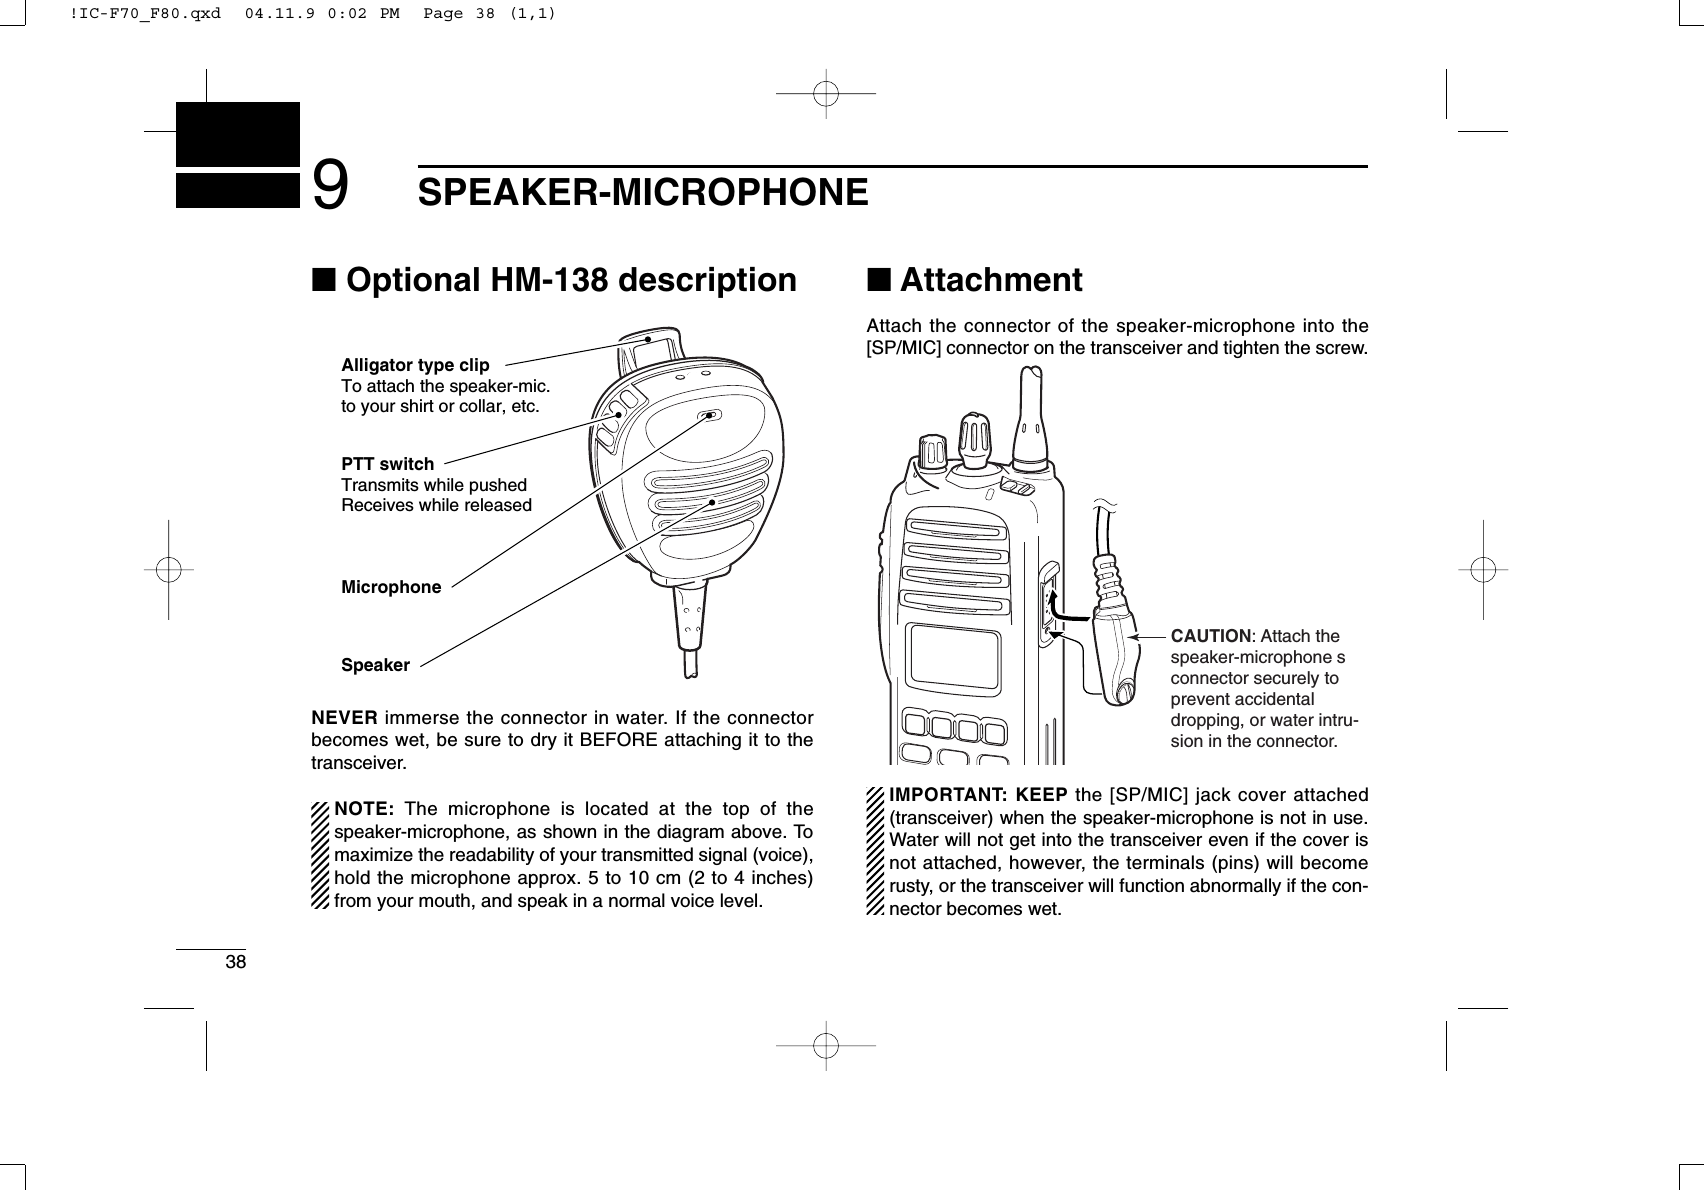 389SPEAKER-MICROPHONE■Optional HM-138 descriptionNEVER immerse the connector in water. If the connectorbecomes wet, be sure to dry it BEFORE attaching it to thetransceiver.NOTE: The microphone is located at the top of thespeaker-microphone, as shown in the diagram above. Tomaximize the readability of your transmitted signal (voice),hold the microphone approx. 5 to 10 cm (2 to 4 inches)from your mouth, and speak in a normal voice level.■AttachmentAttach the connector of the speaker-microphone into the[SP/MIC] connector on the transceiver and tighten the screw.IMPORTANT: KEEP the [SP/MIC] jack cover attached(transceiver) when the speaker-microphone is not in use.Water will not get into the transceiver even if the cover isnot attached, however, the terminals (pins) will becomerusty, or the transceiver will function abnormally if the con-nector becomes wet.CAUTION: Attach the speaker-microphone s connector securely to prevent accidental dropping, or water intru-sion in the connector.Alligator type clipTo attach the speaker-mic.to your shirt or collar, etc.PTT switchTransmits while pushedReceives while releasedMicrophoneSpeaker!IC-F70_F80.qxd  04.11.9 0:02 PM  Page 38 (1,1)